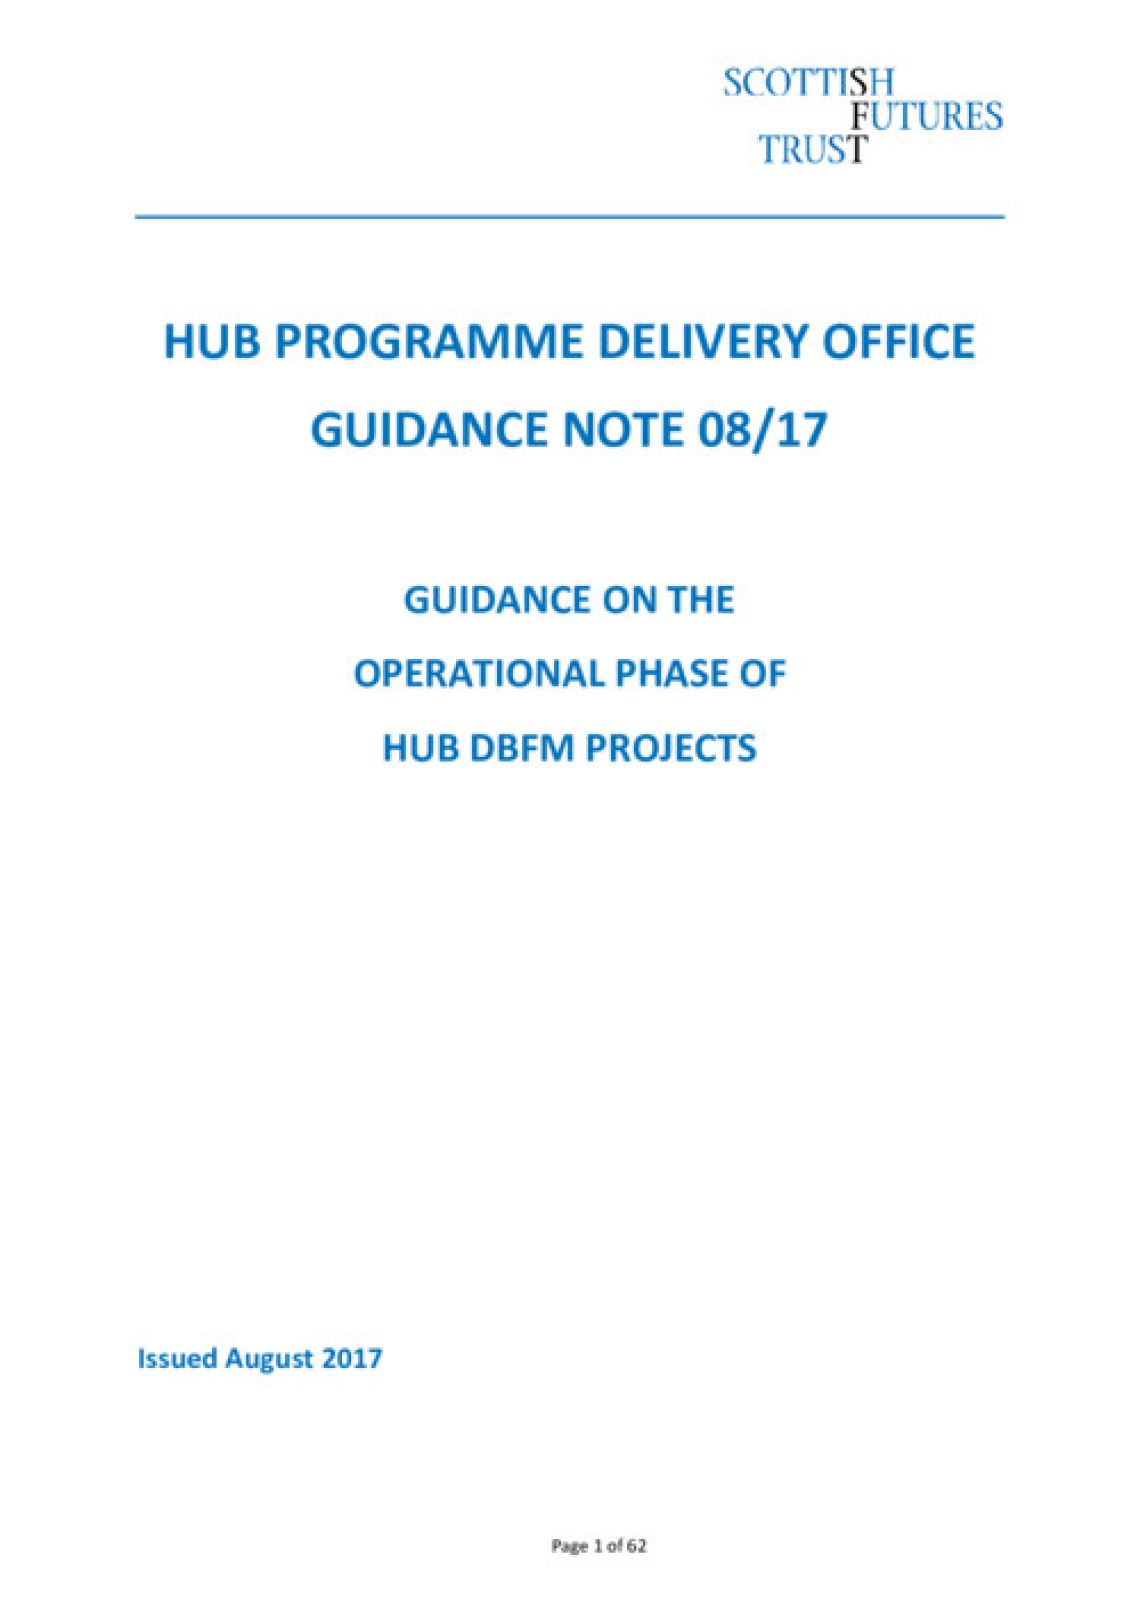 Operational Phase Guidance cover